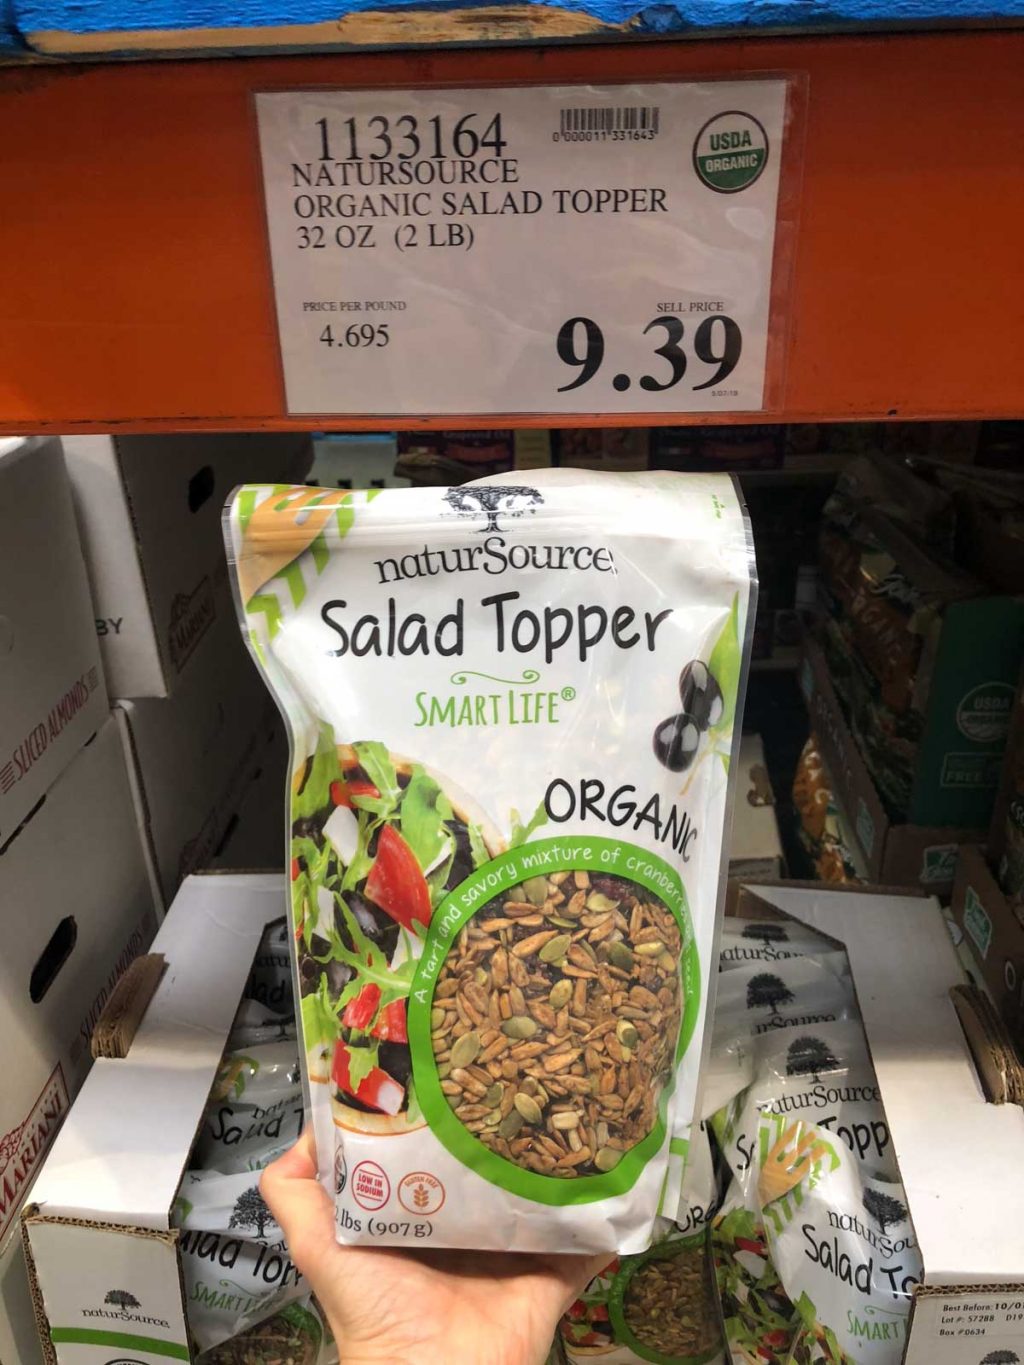 A hand holding a bag of organic vegan salad topper for $9.39 at Costco.